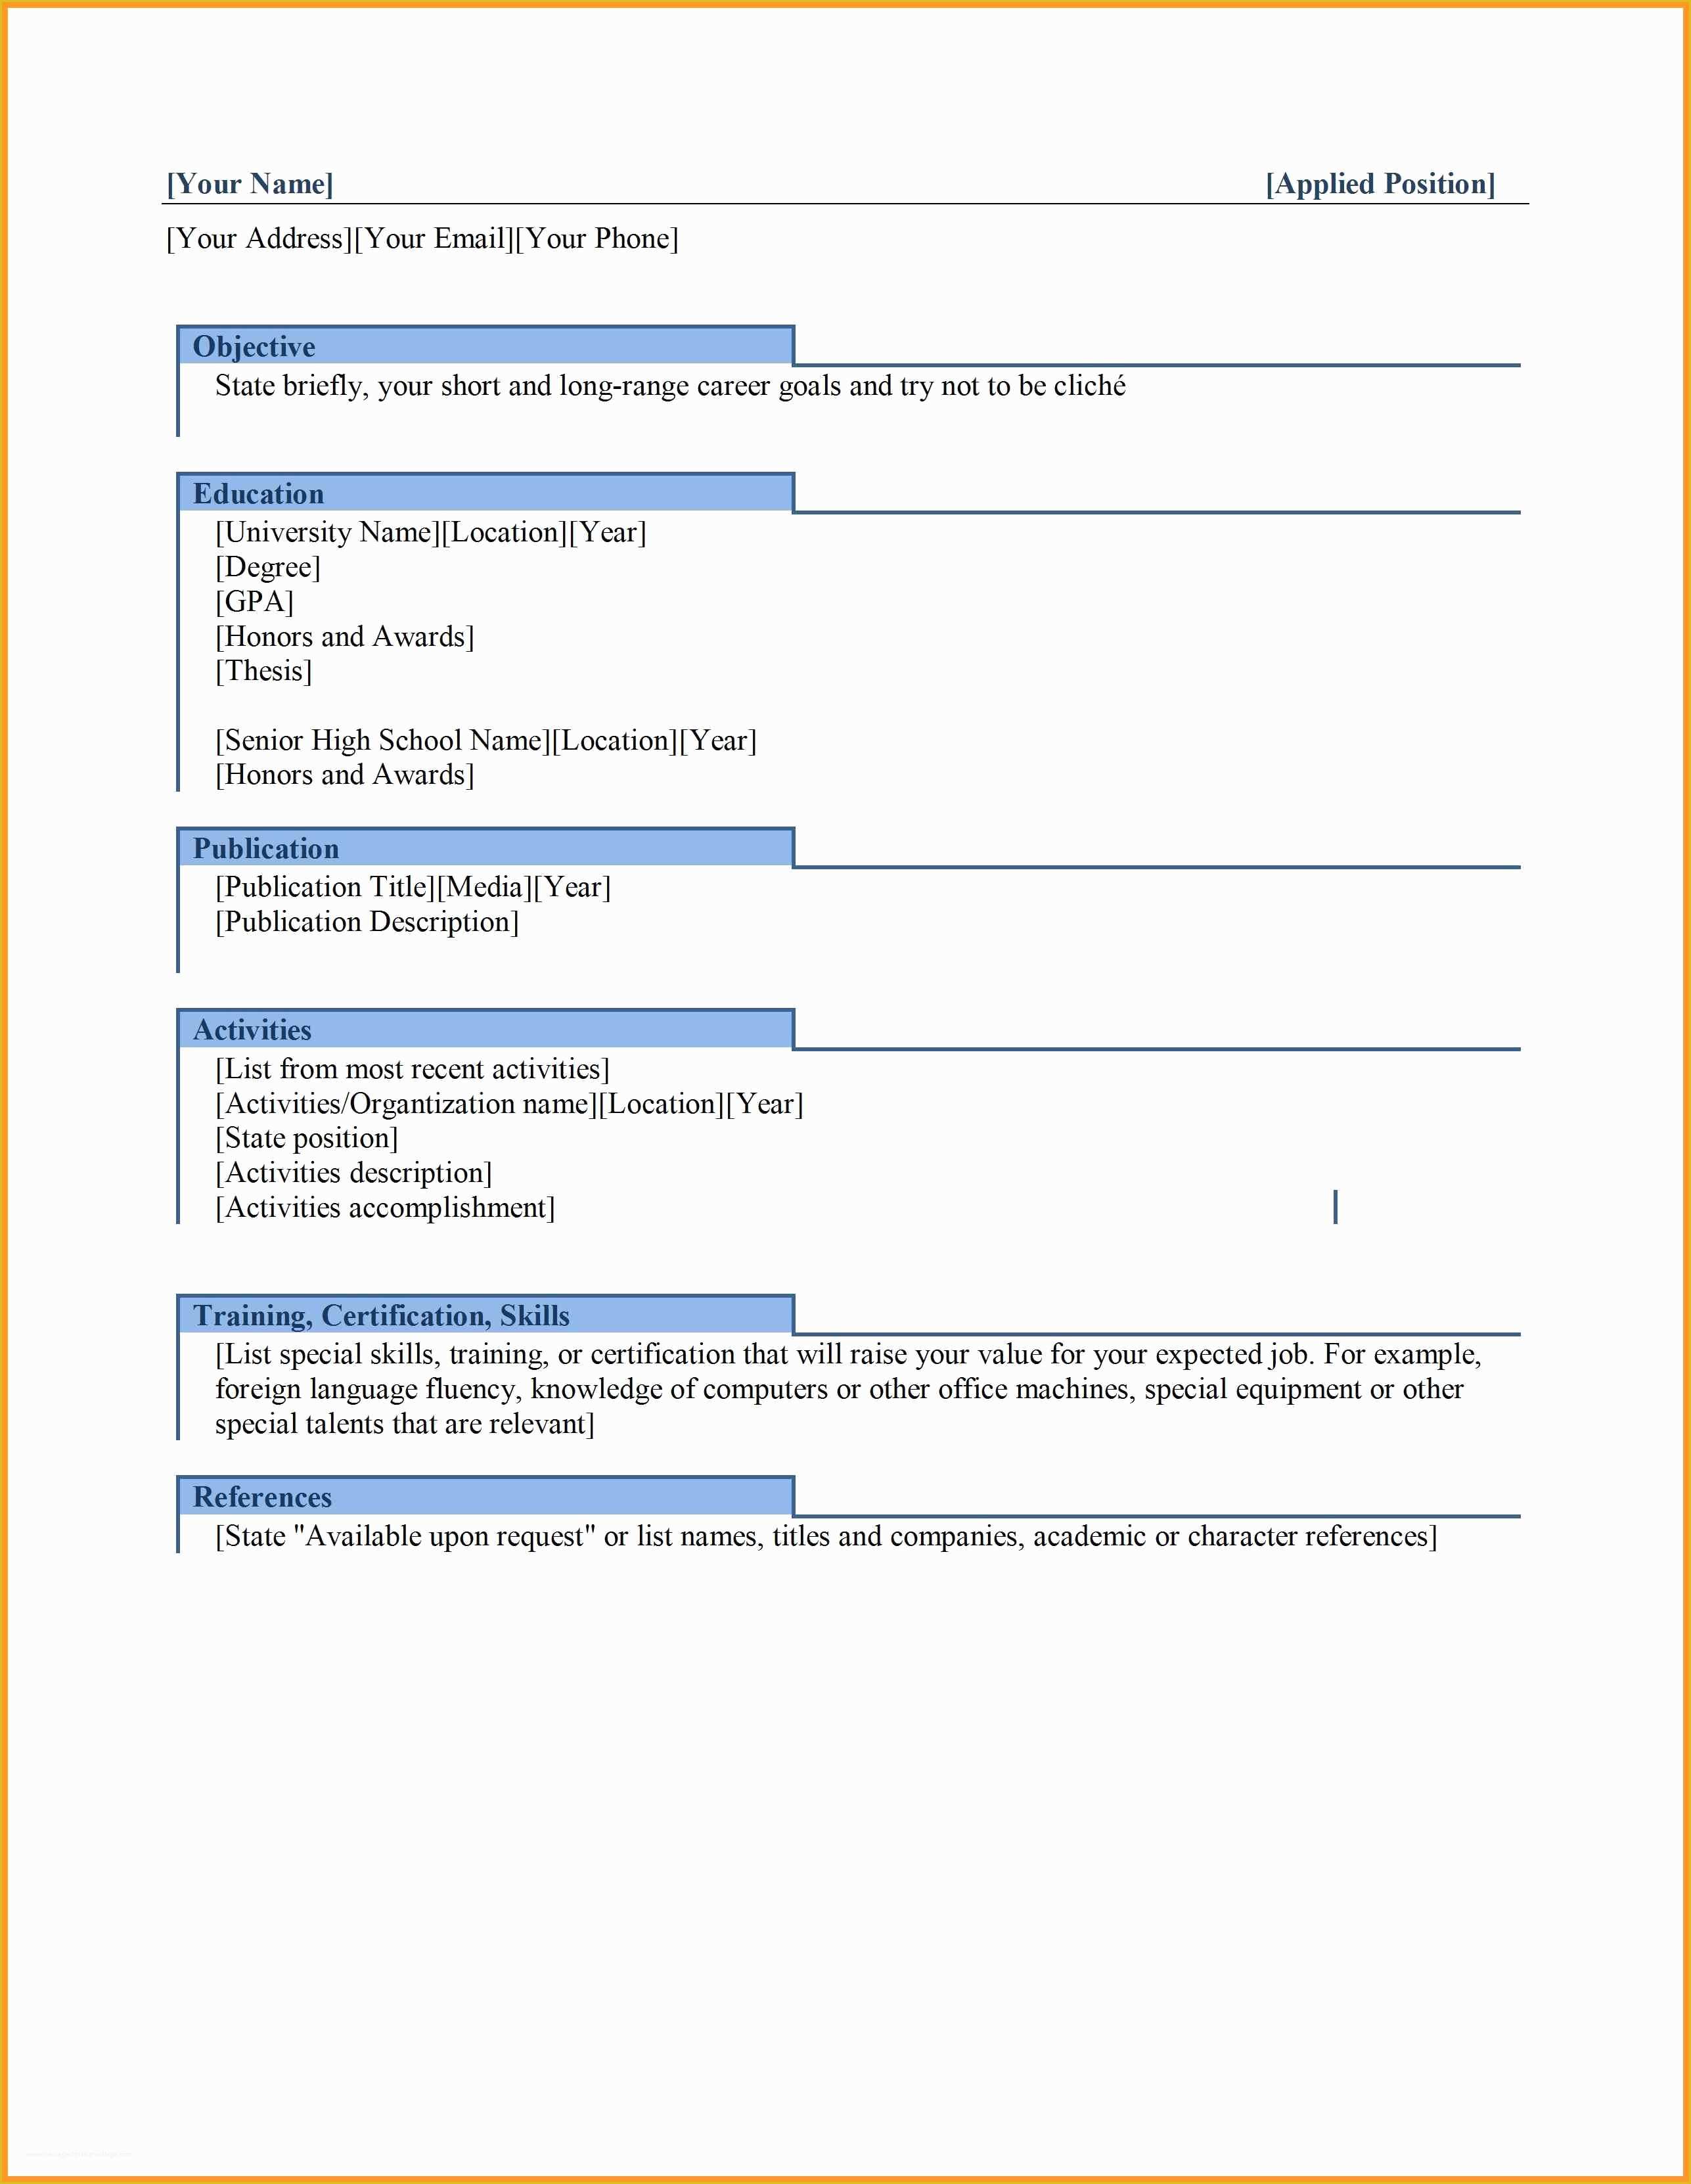 Download Free Resume Templates 2017 Of Microsoft Office Word Templates Free